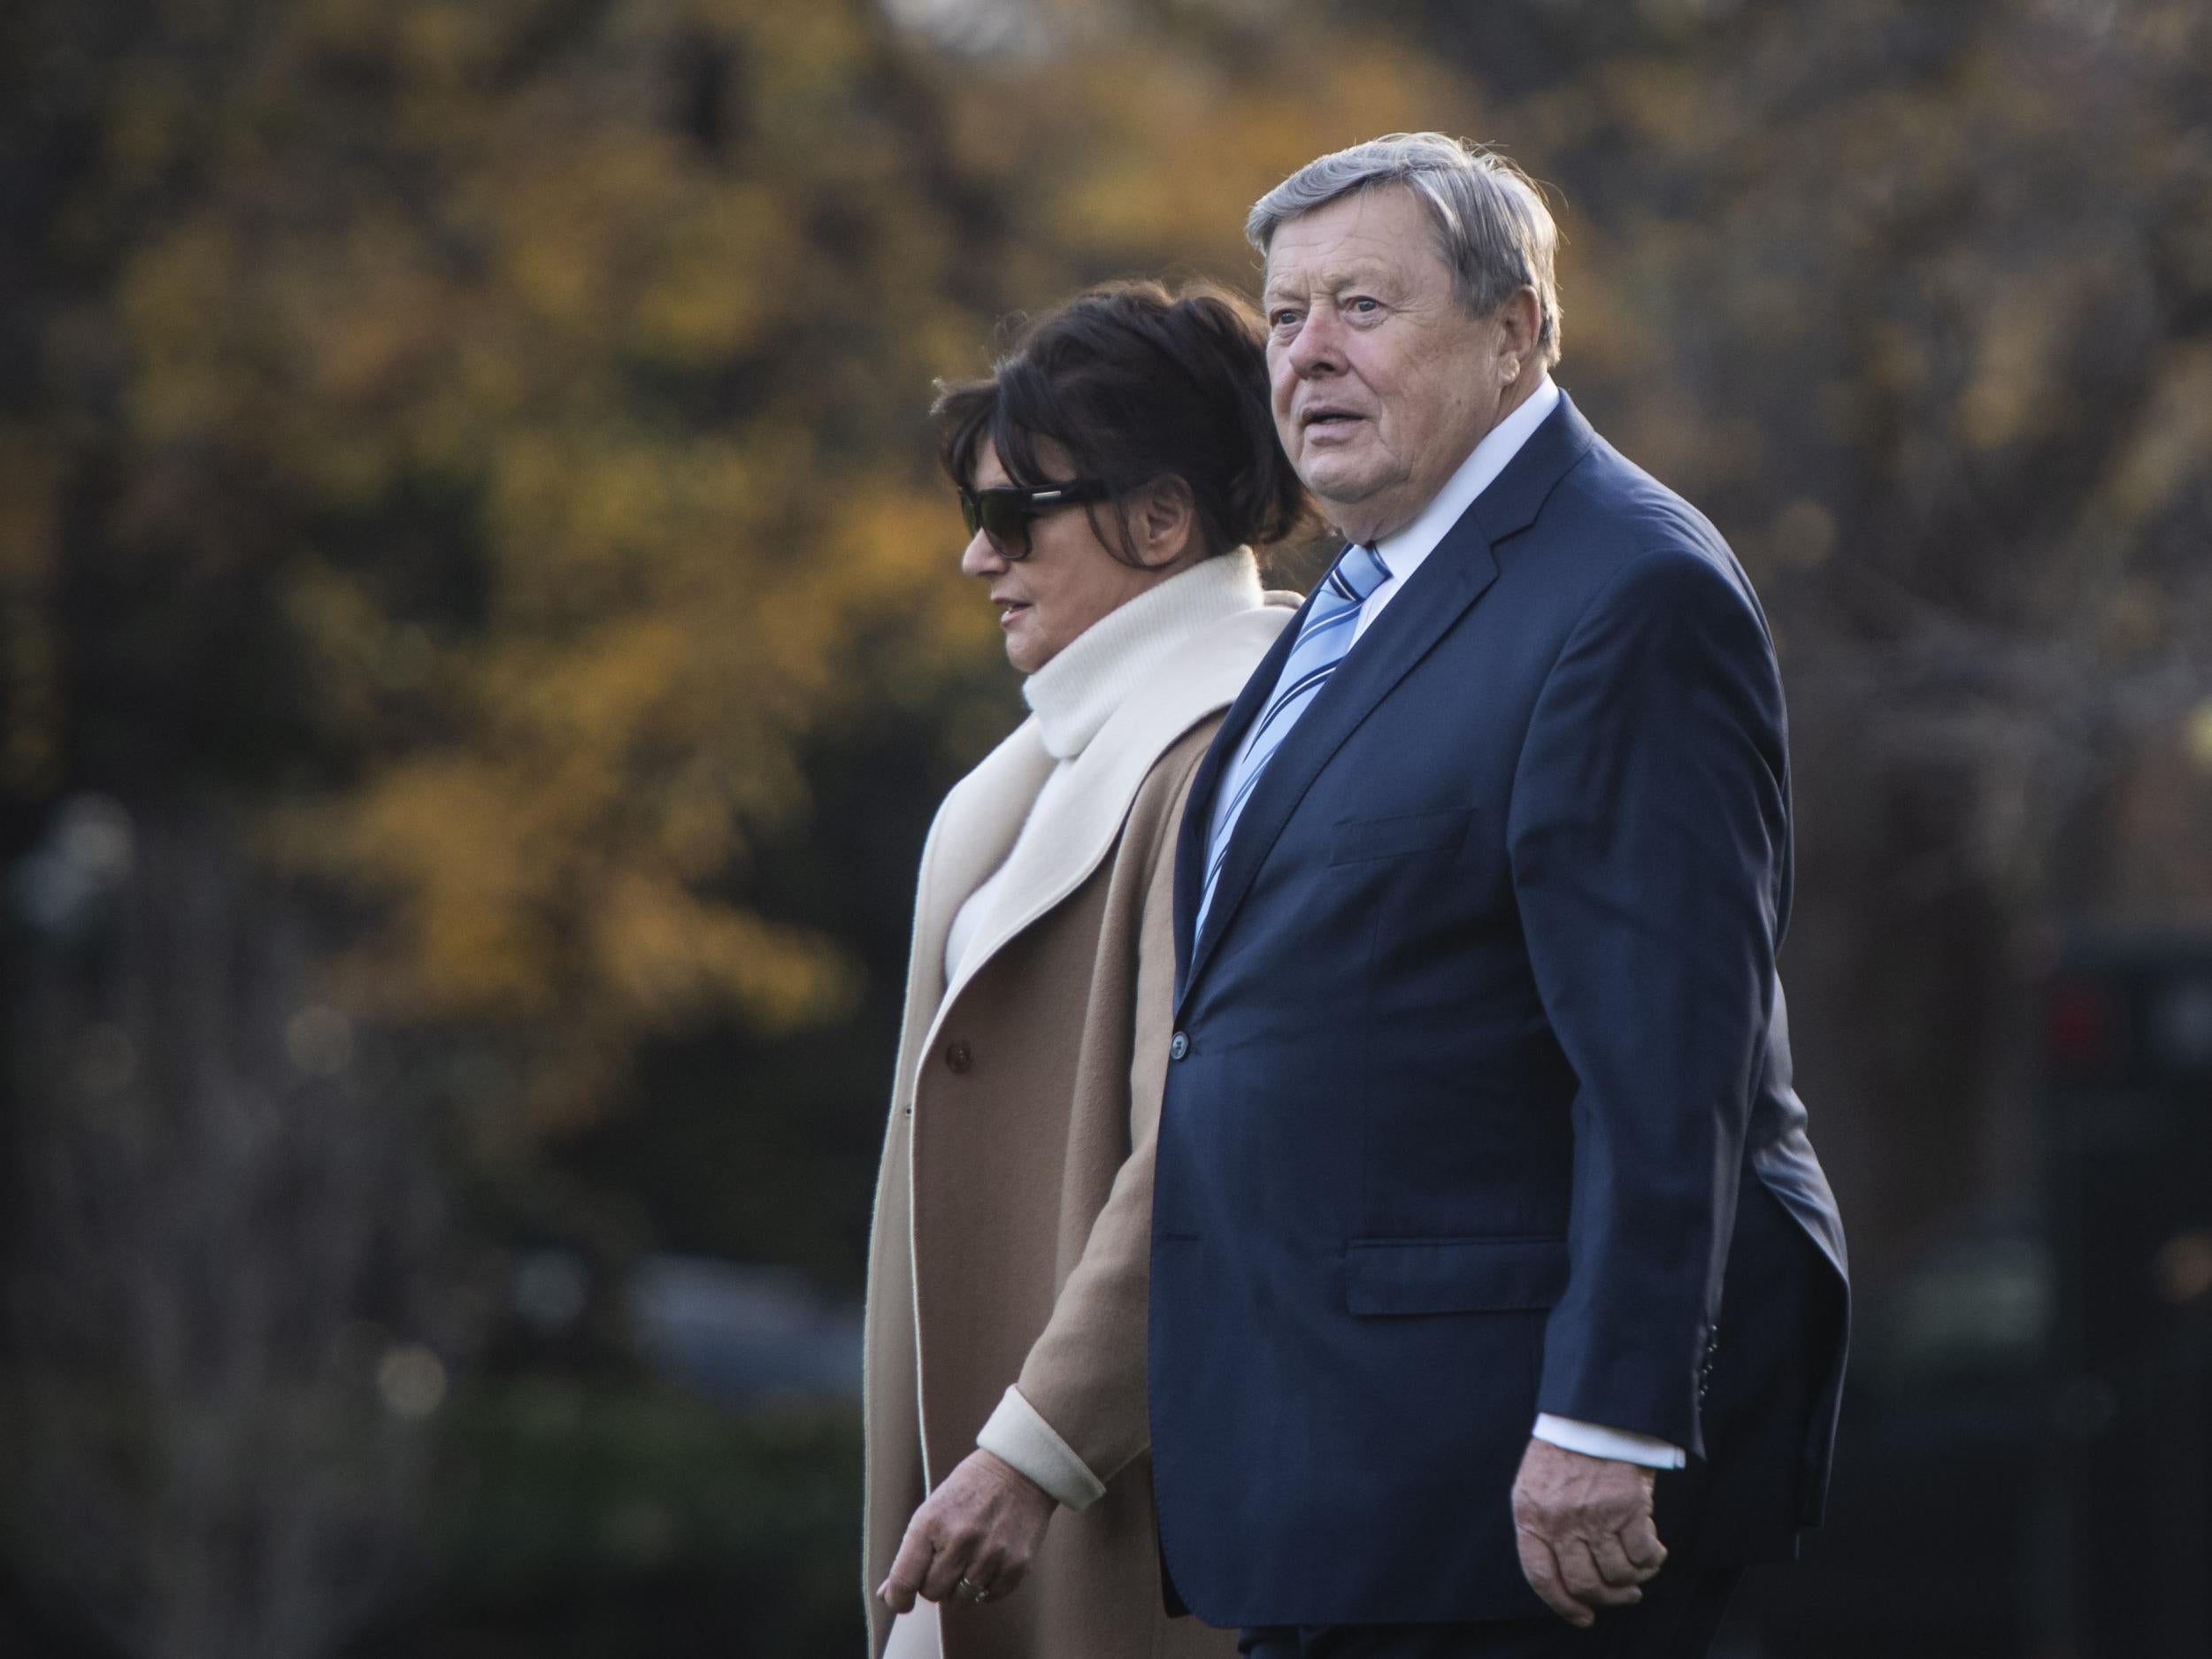 Viktor and Amalija Knavs, the parents of first lady Melania Trump, follow the president from the Oval Office